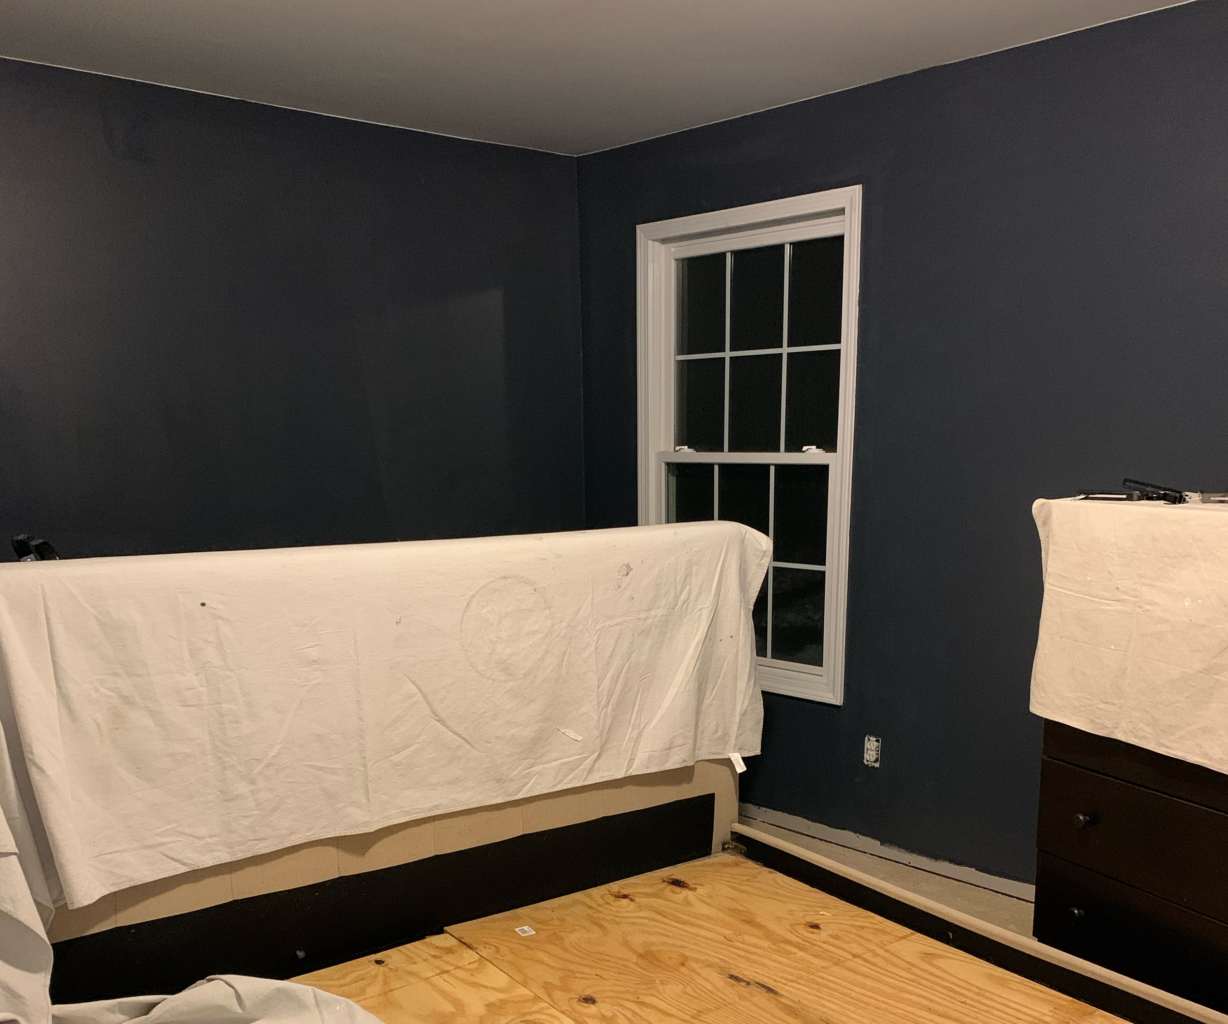 bedroom at night sherwin williams cyberspace gray